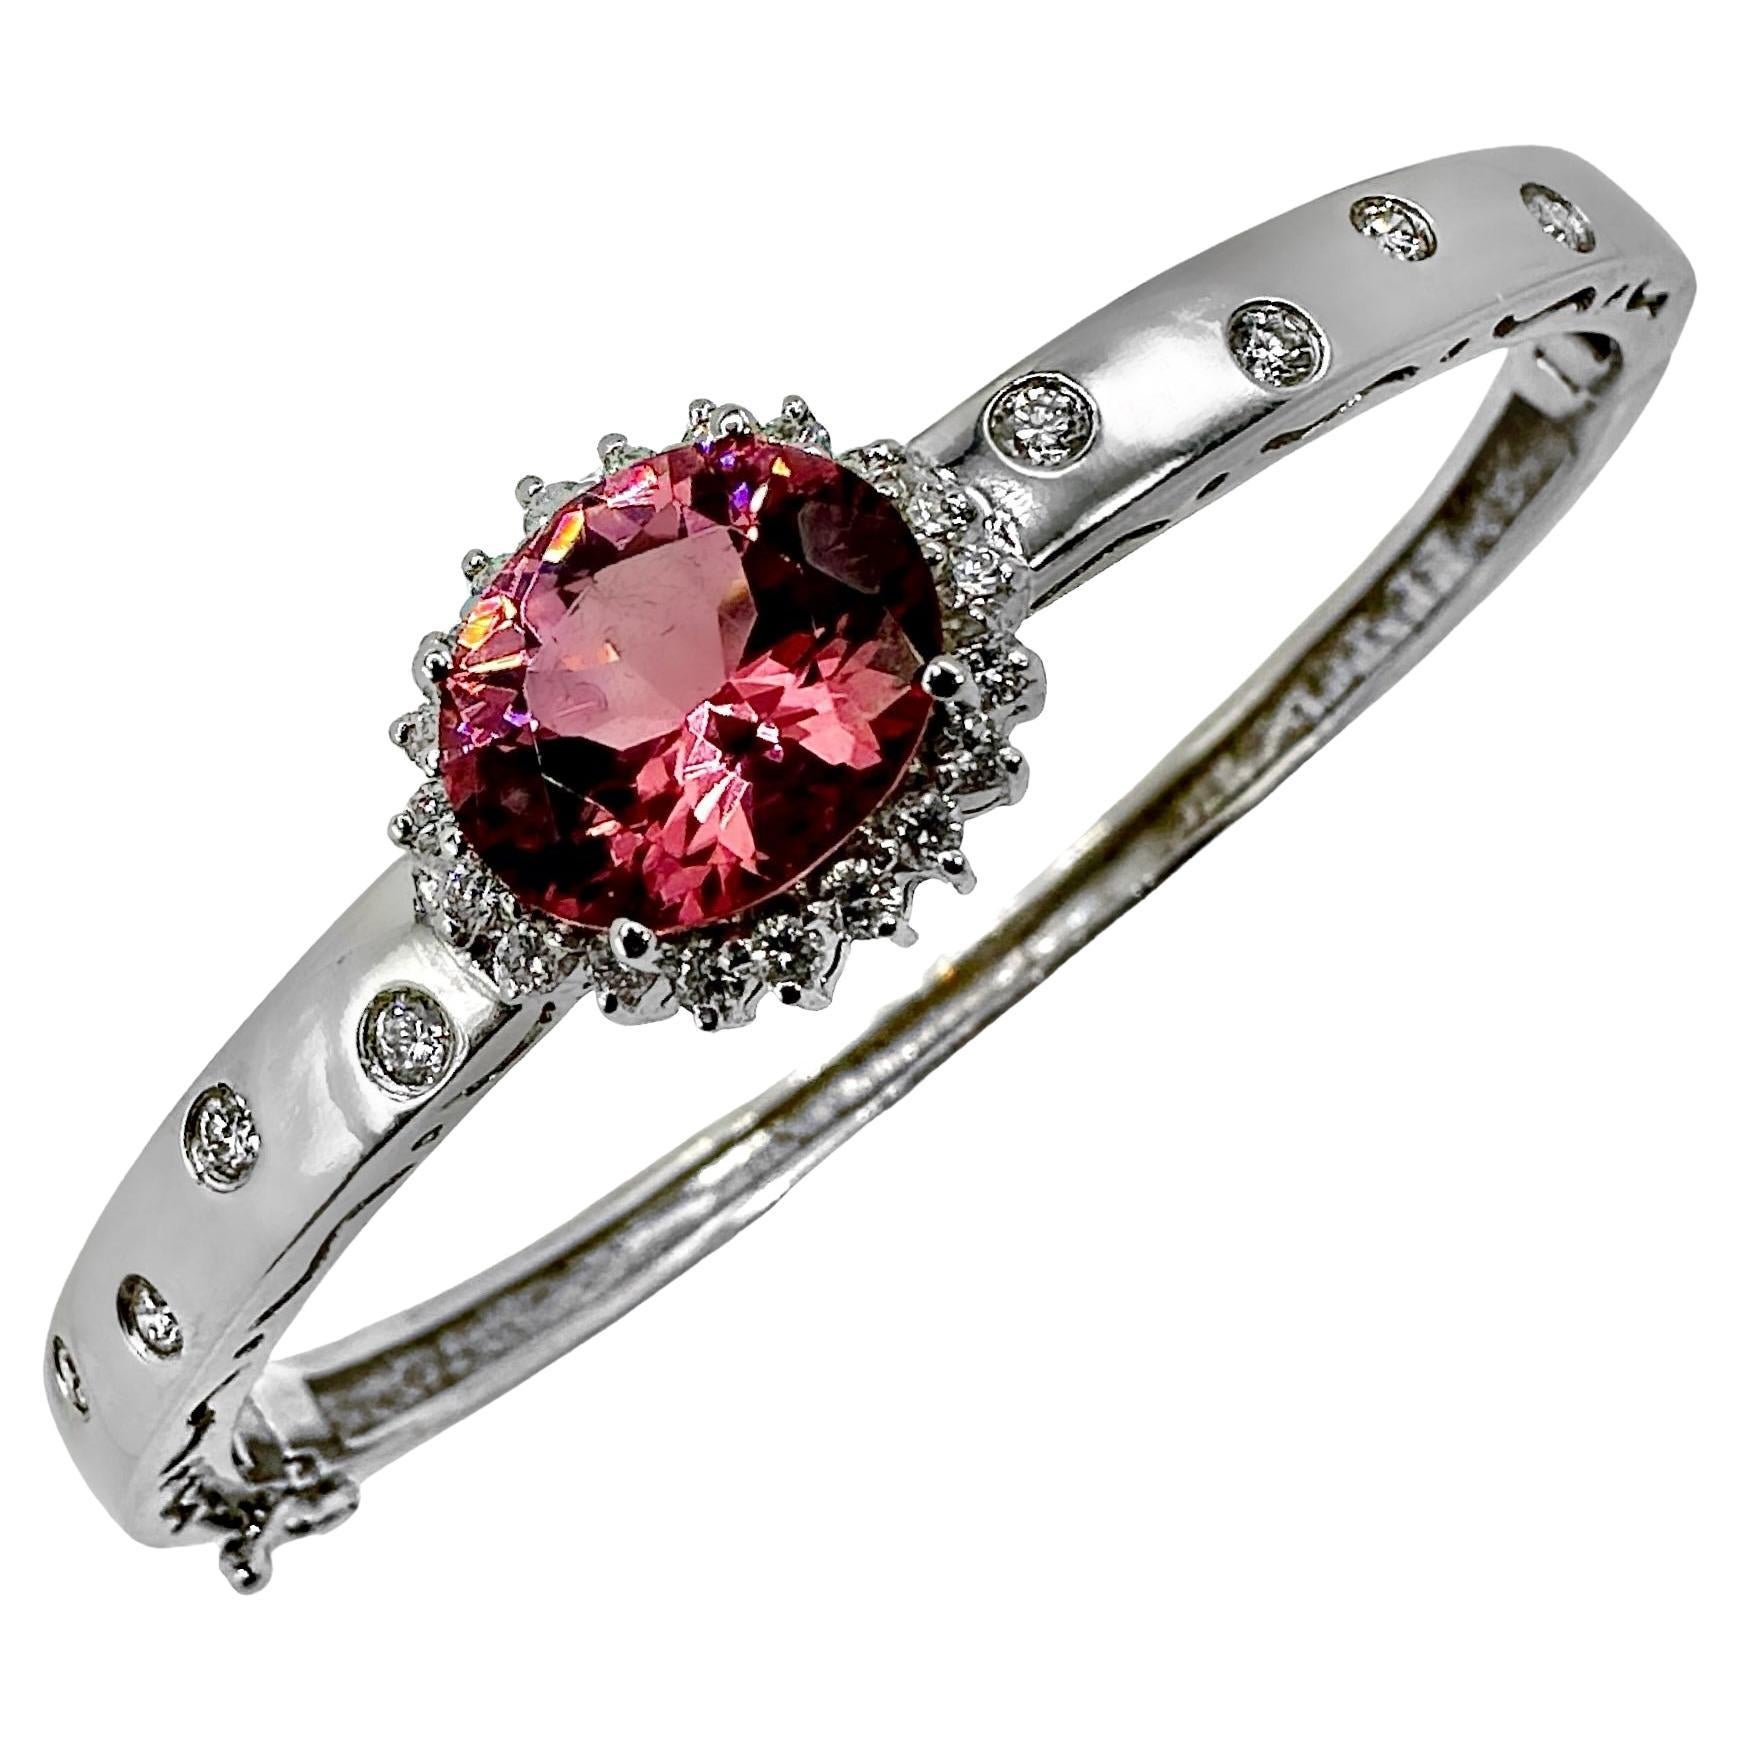 White Gold Bangle Bracelet with 4.27ct Oval Pink Tourmaline and Diamond Halo For Sale